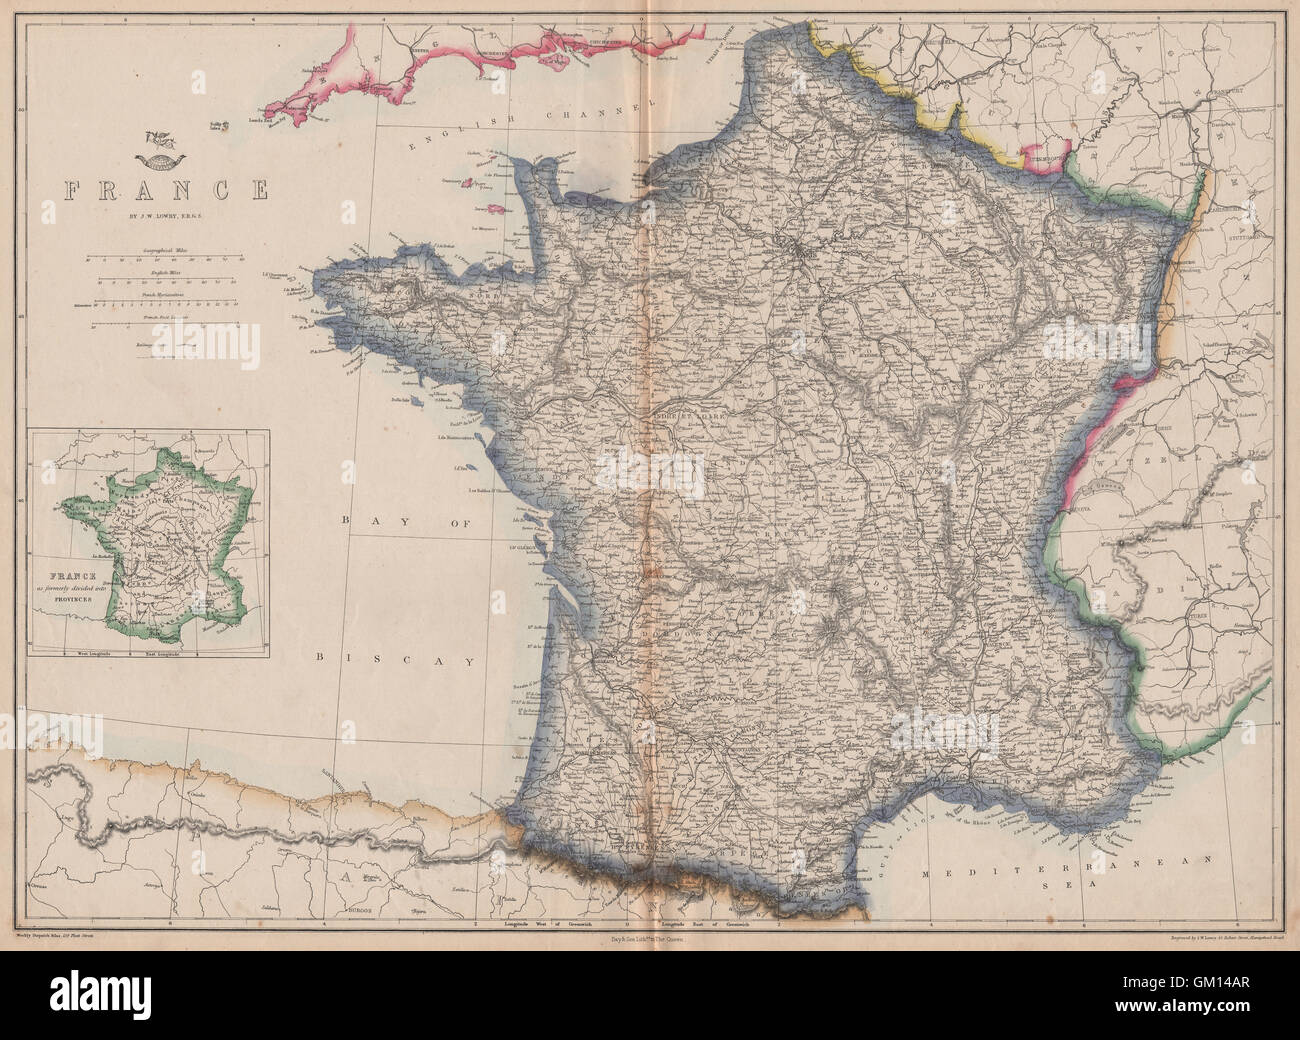 FRANCE. Prior to the annexation of Savoie & Comte de Nice. JW LOWRY, 1863 map Stock Photo